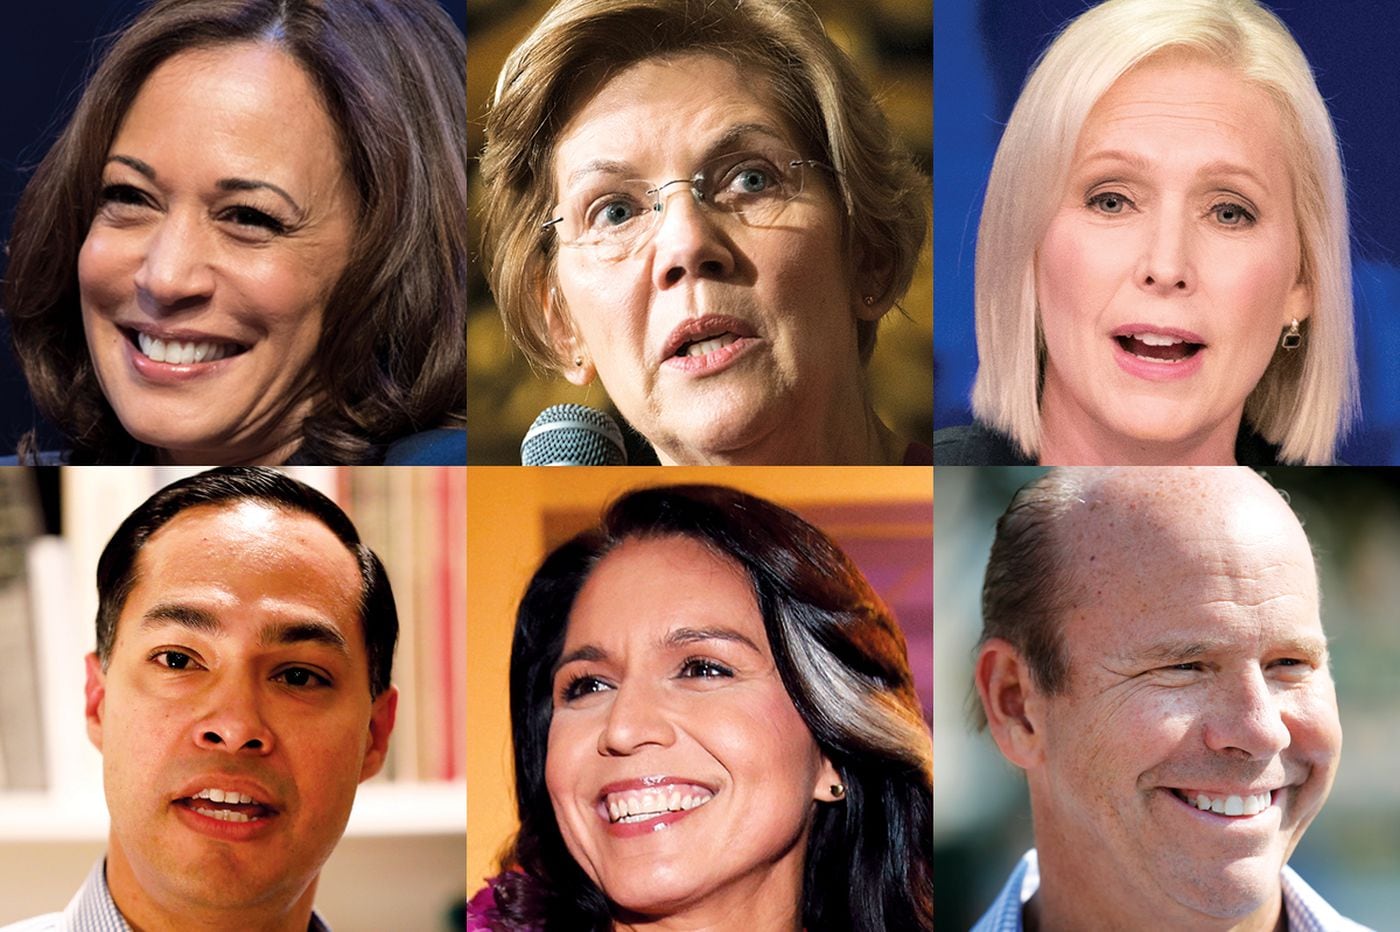 Democrats running for president in 2020